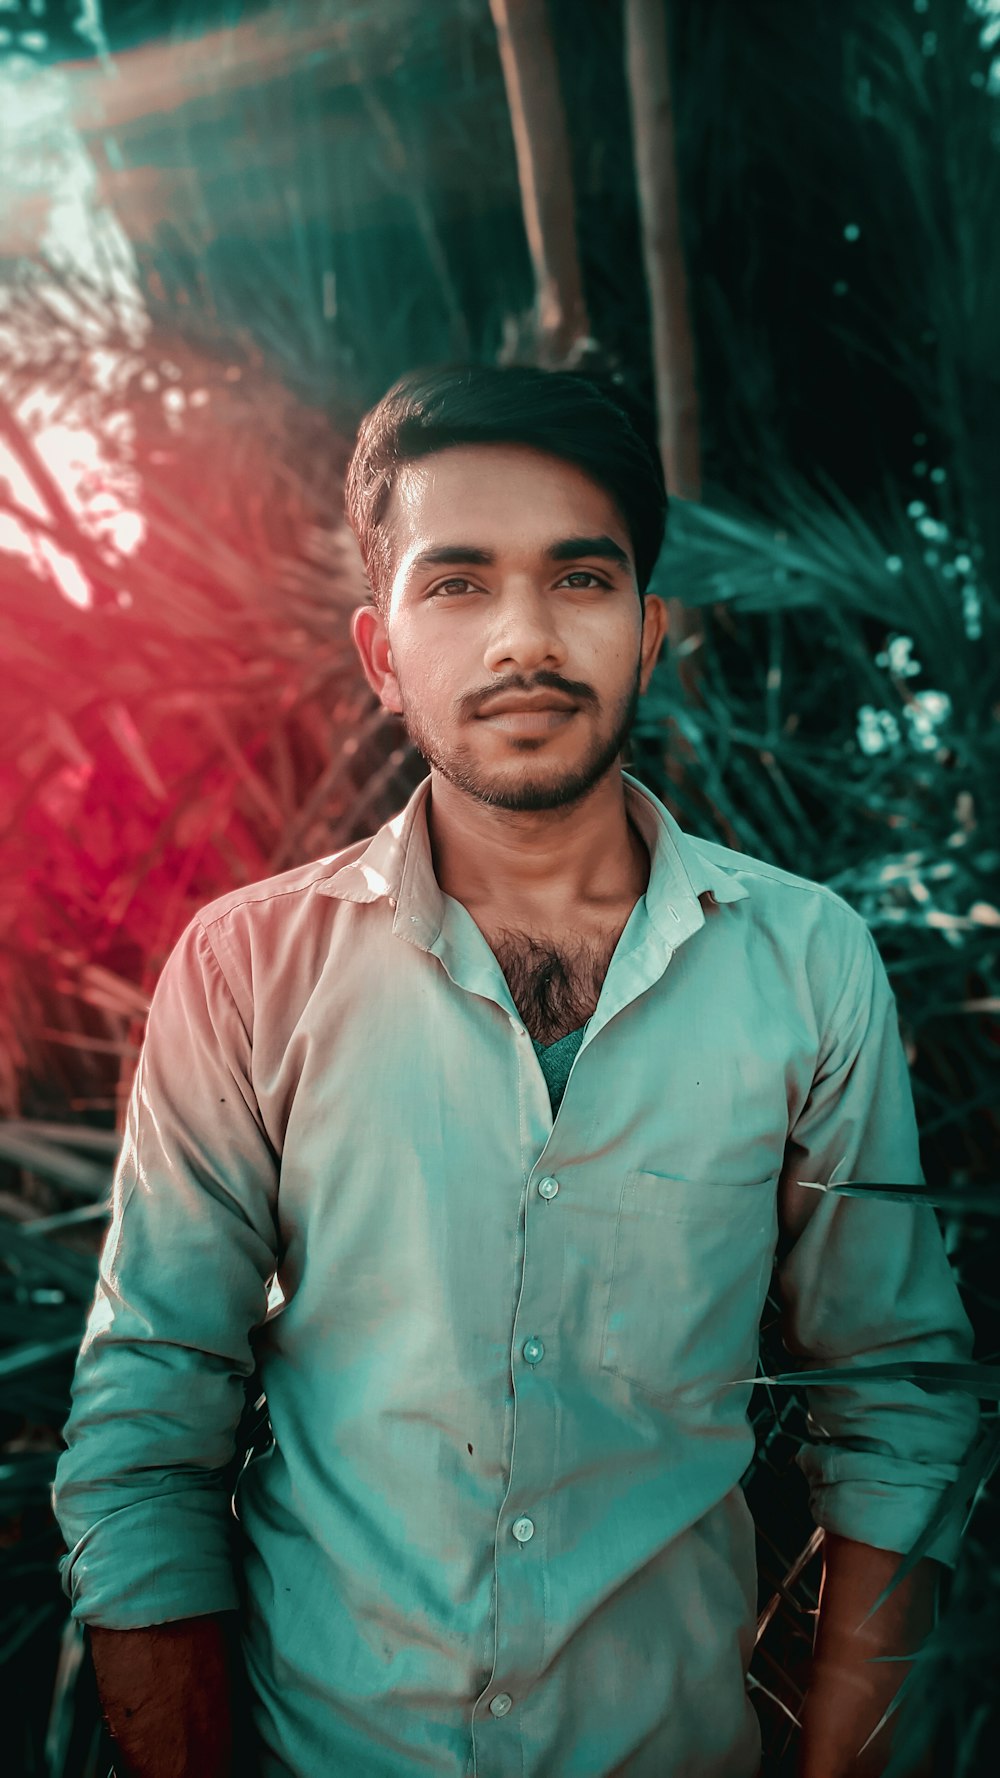 500+ Indian Man Pictures [HD] | Download Free Images on Unsplash